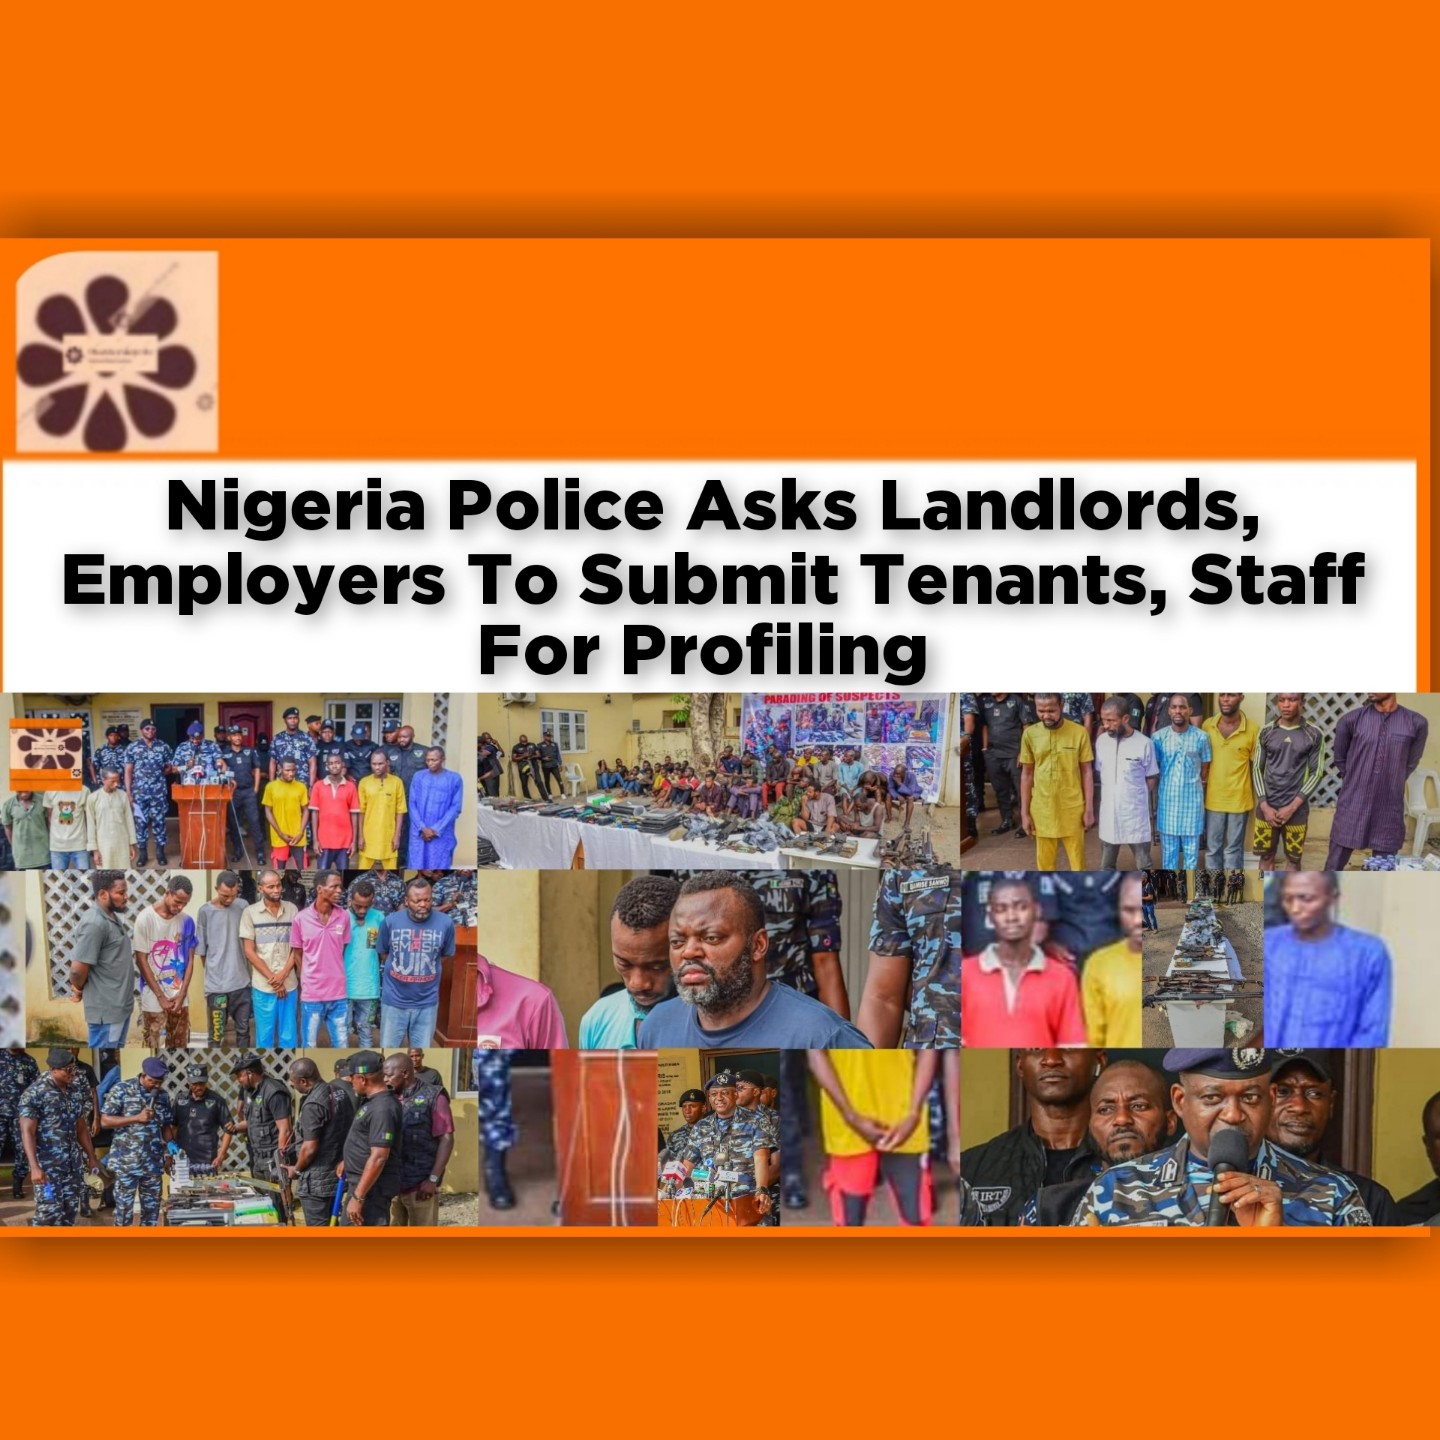 Nigeria Police Asks Landlords, Employers To Submit Tenants, Staff For Profiling ~ OsazuwaAkonedo #AGF